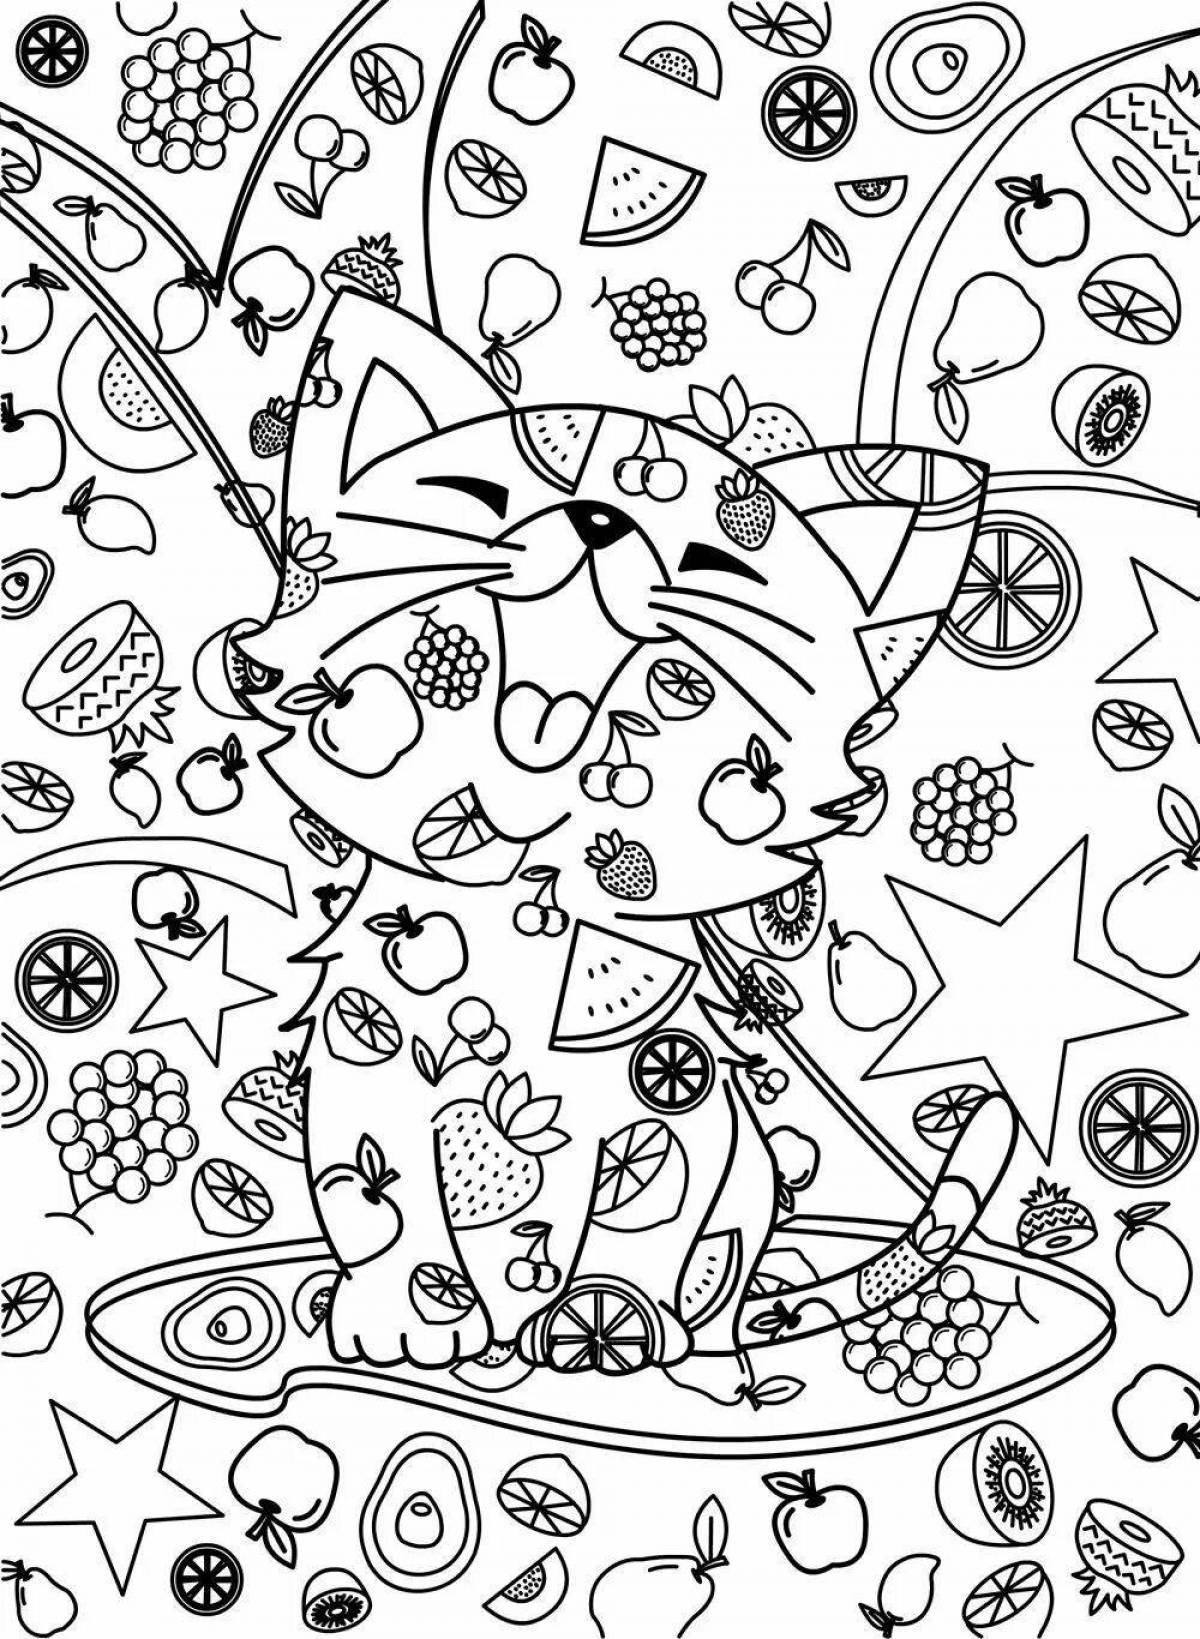 Felicity cat colorful coloring page